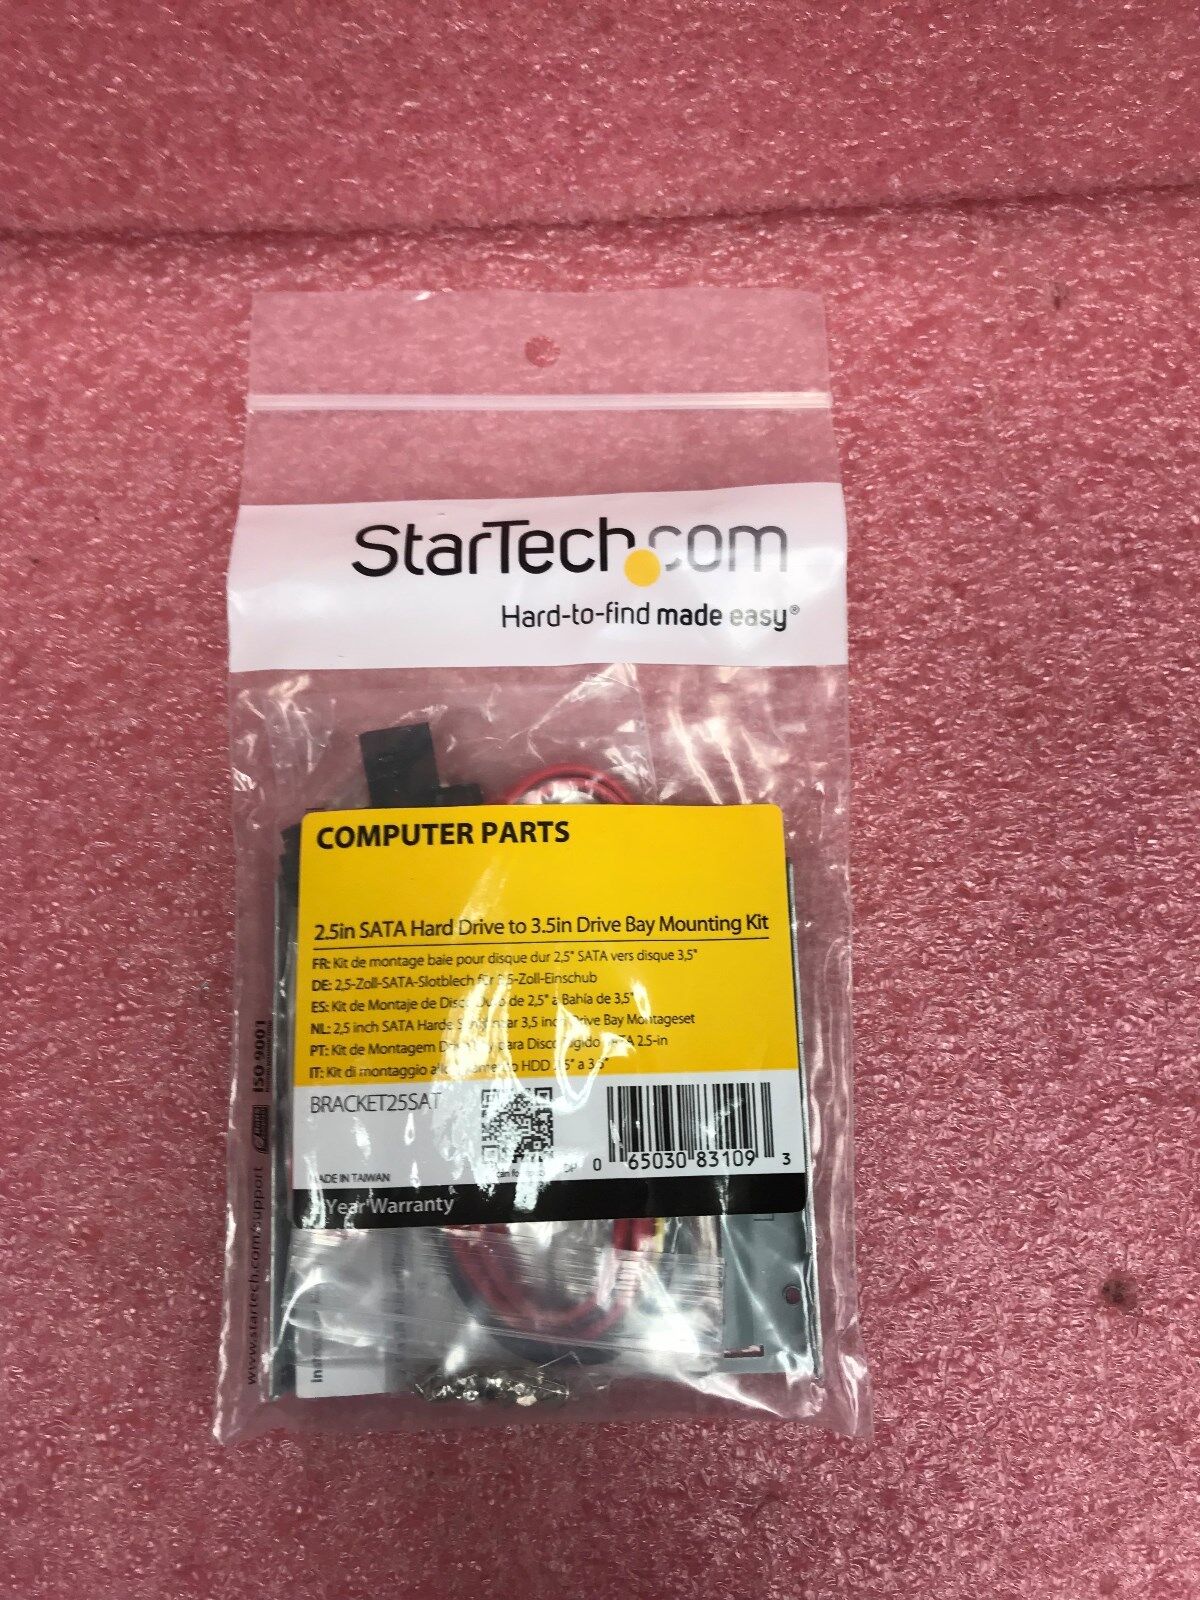 *FAC SEALED* StarTech BRACKET25SAT 2.5in Hard Drive to 3.5in Drive Bay Mounting 